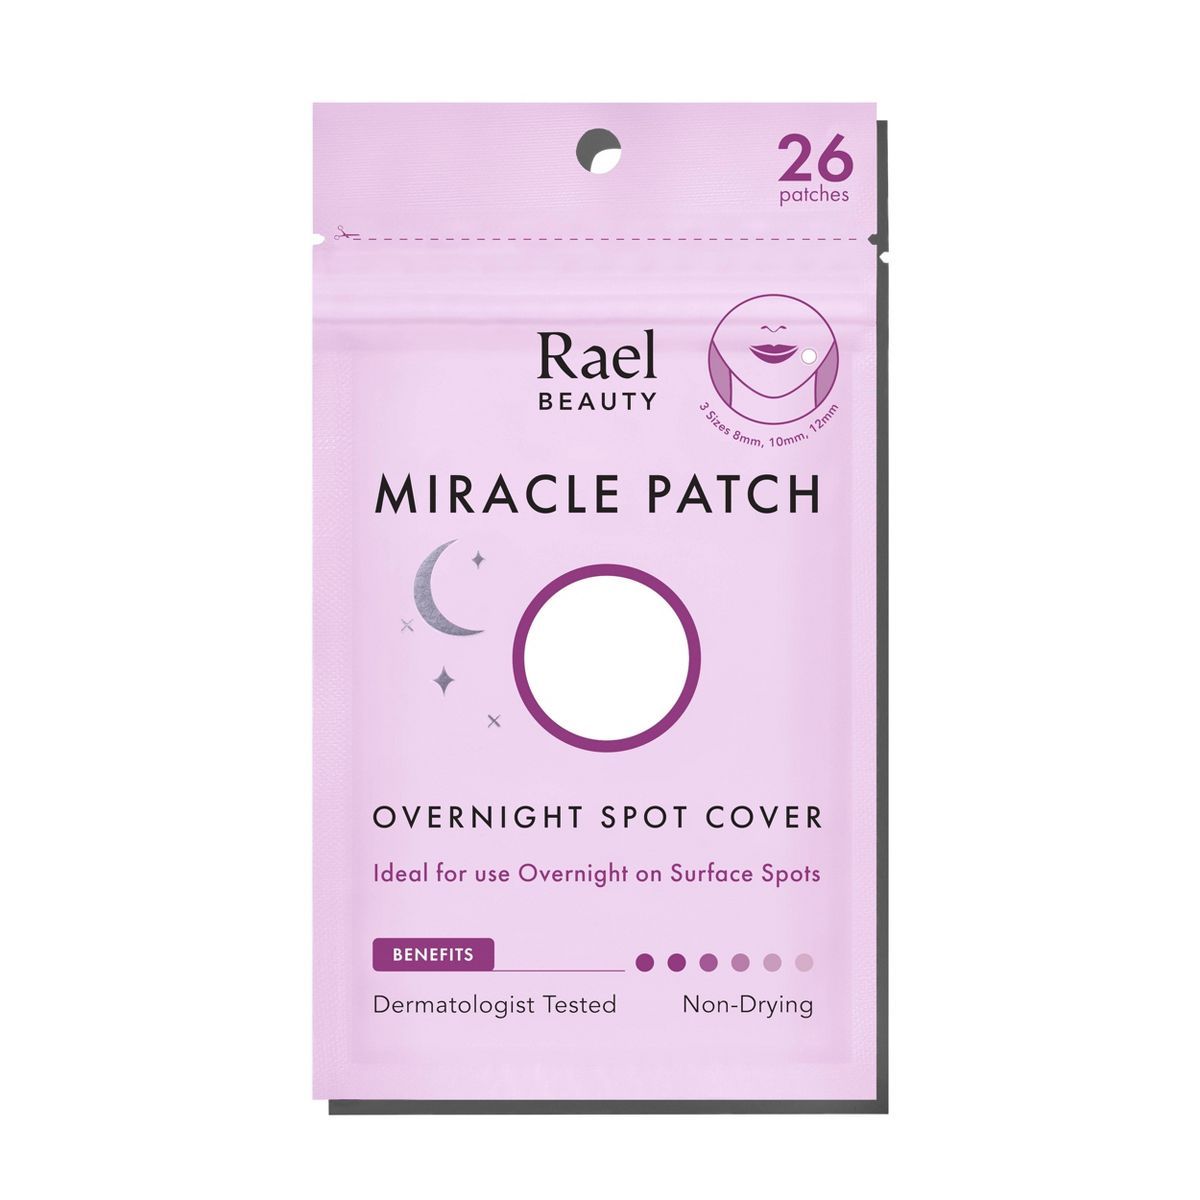 Rael Beauty Miracle Pimple Patch Overnight Spot Cover for Acne - 26ct | Target